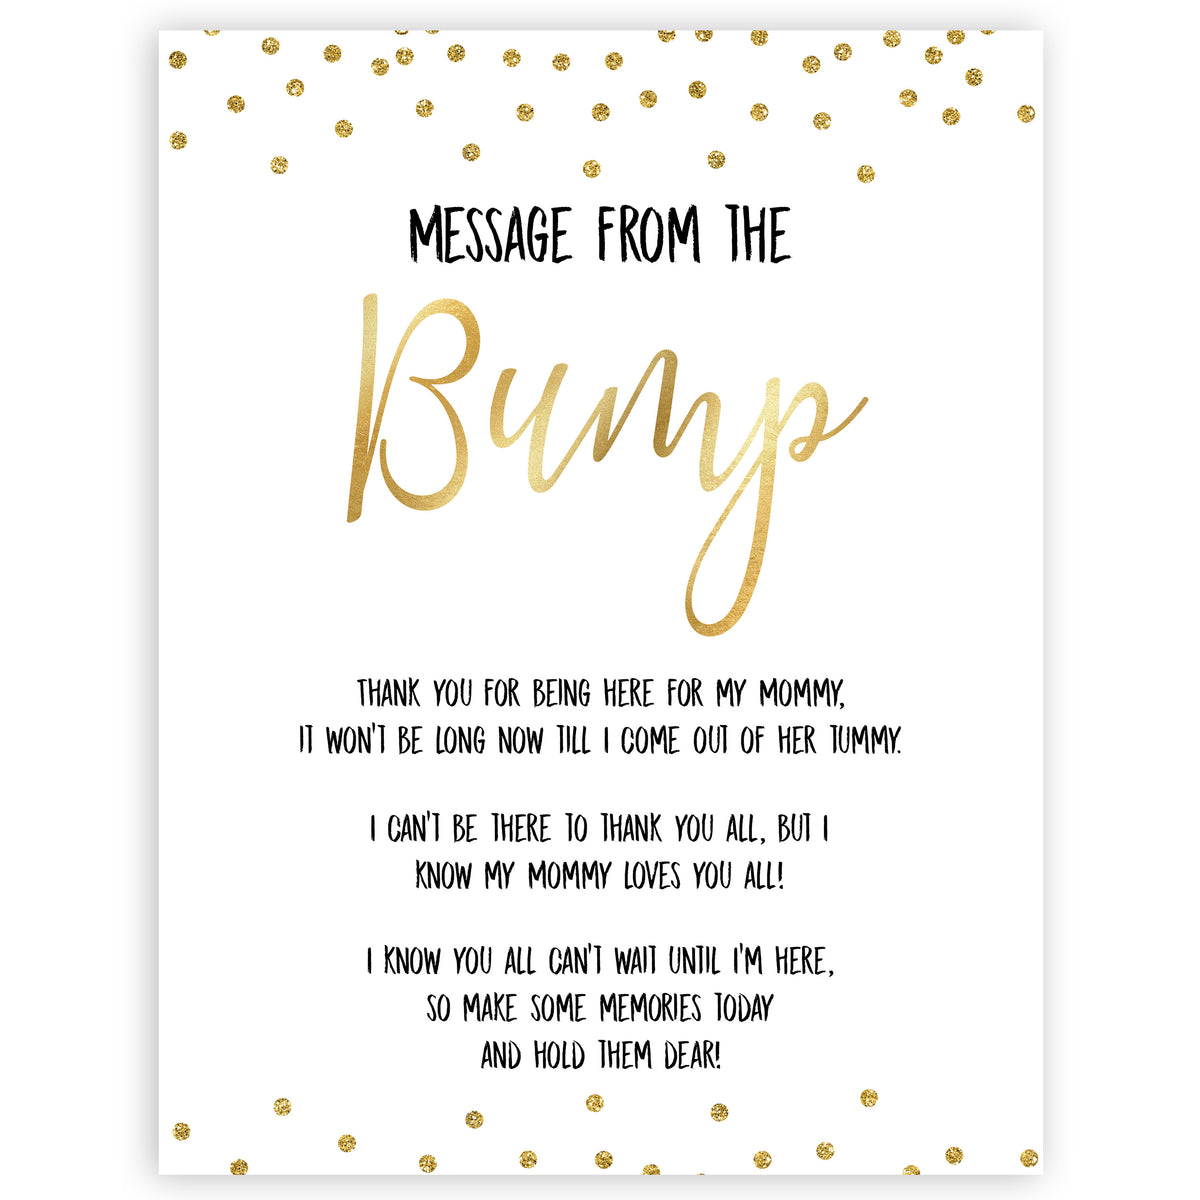 gold baby shower games, message from bump games, printable baby games, fun baby games, popular baby games, baby shower games, gold baby games, print baby games, gold baby shower